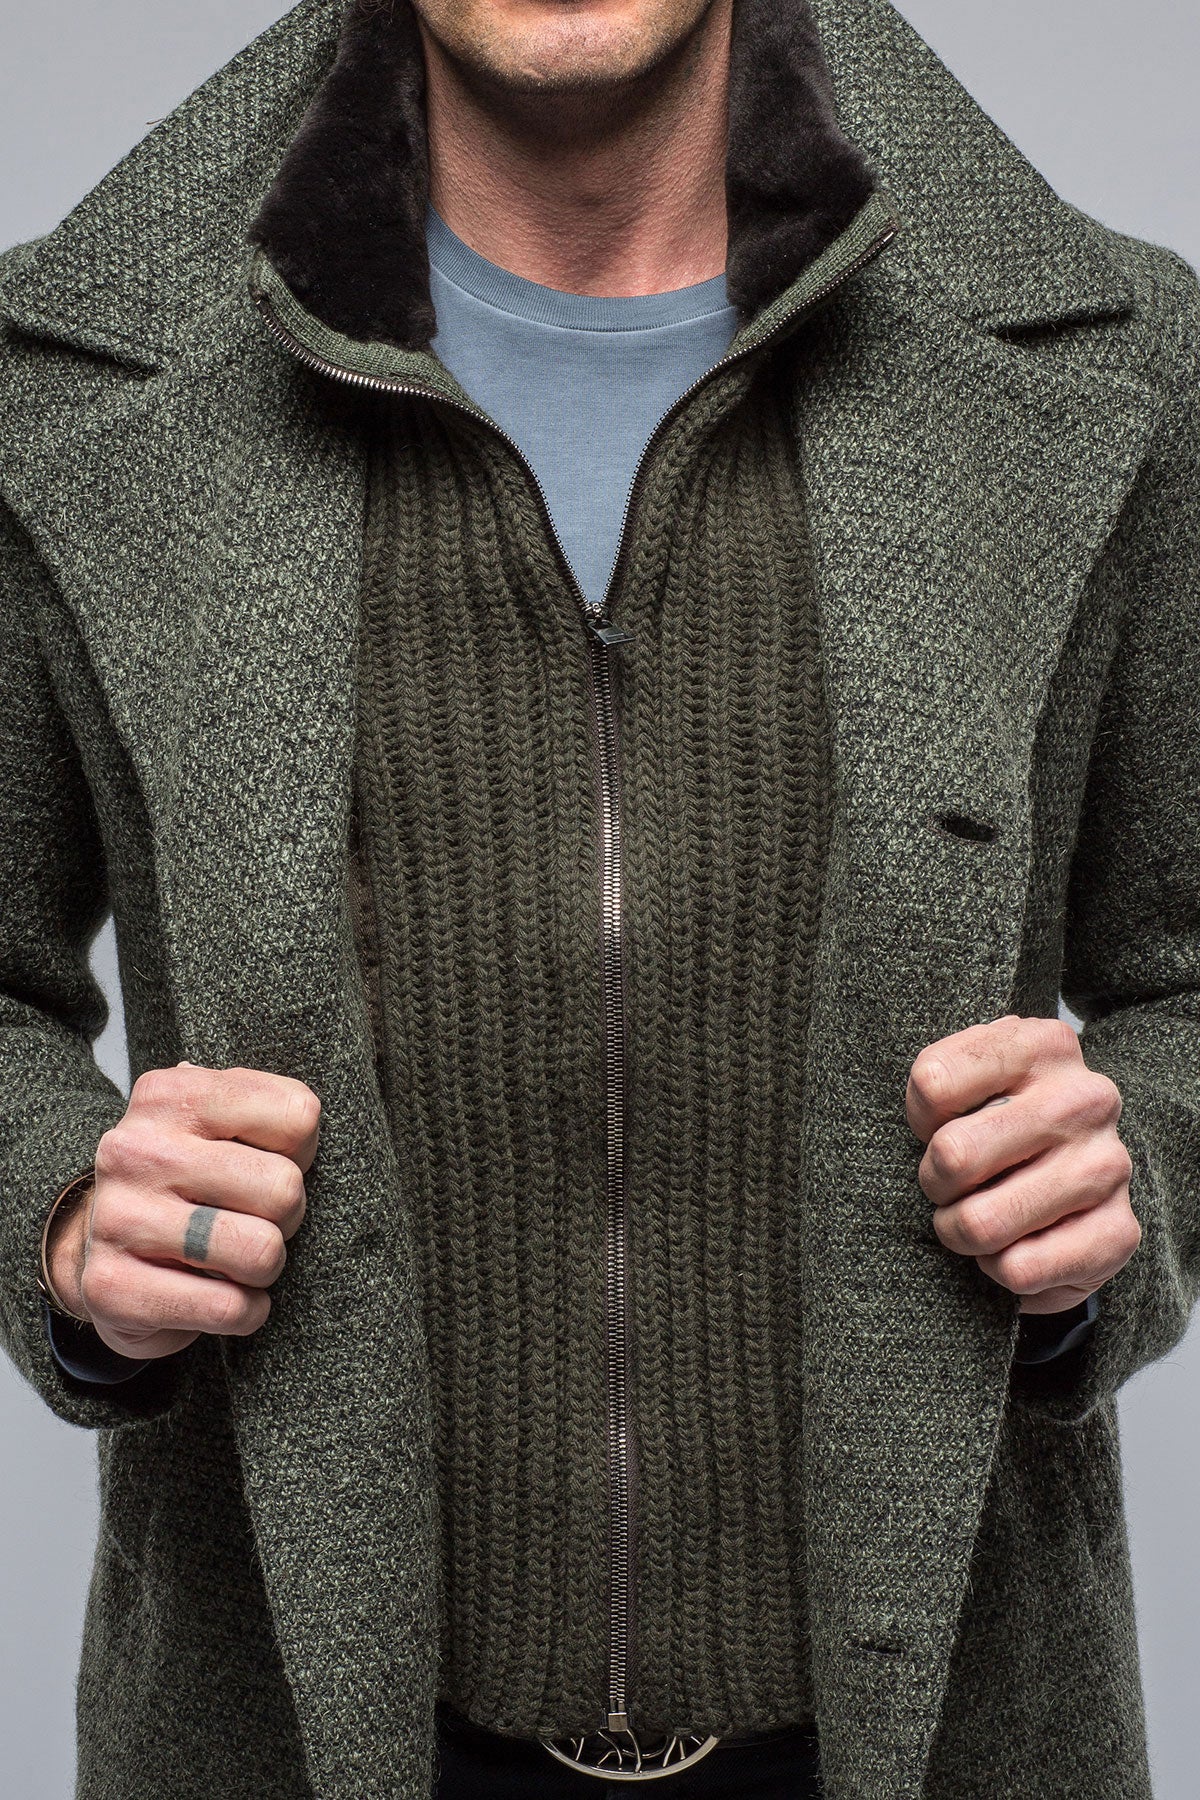 Body Wool/Mohair Jacket | Samples - Mens - Outerwear - Cloth | Gimo's